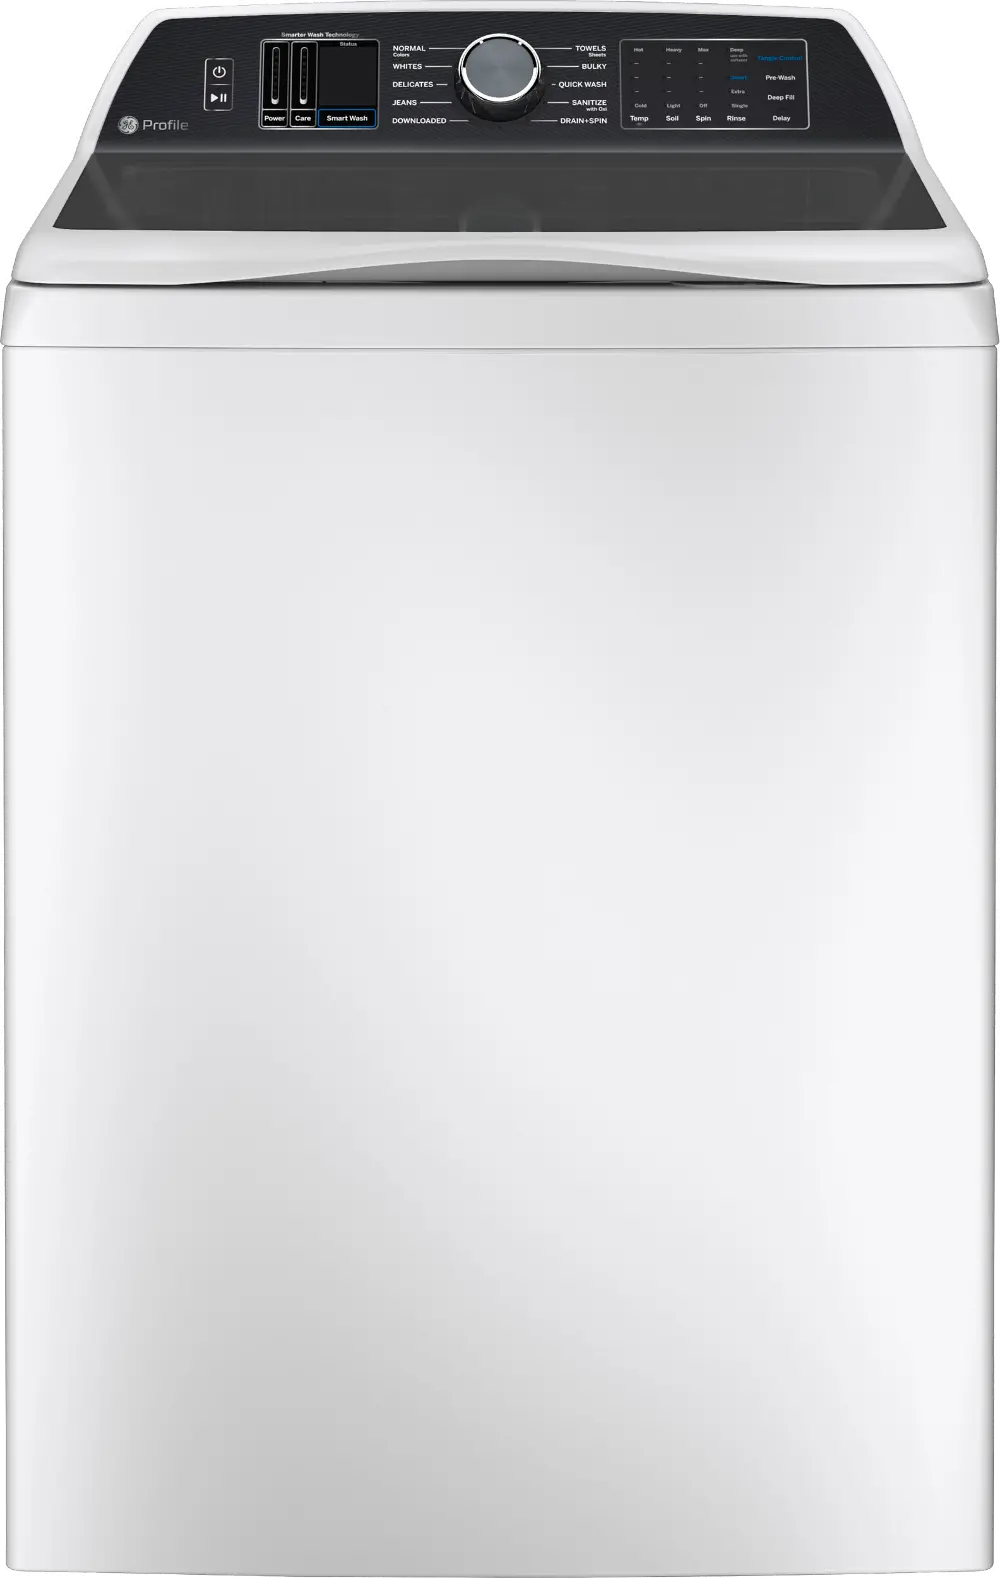 PTW705BSTWS GE Profile 5.3 cu ft Top Load Washer with Agitator- White PT705BSTW-1